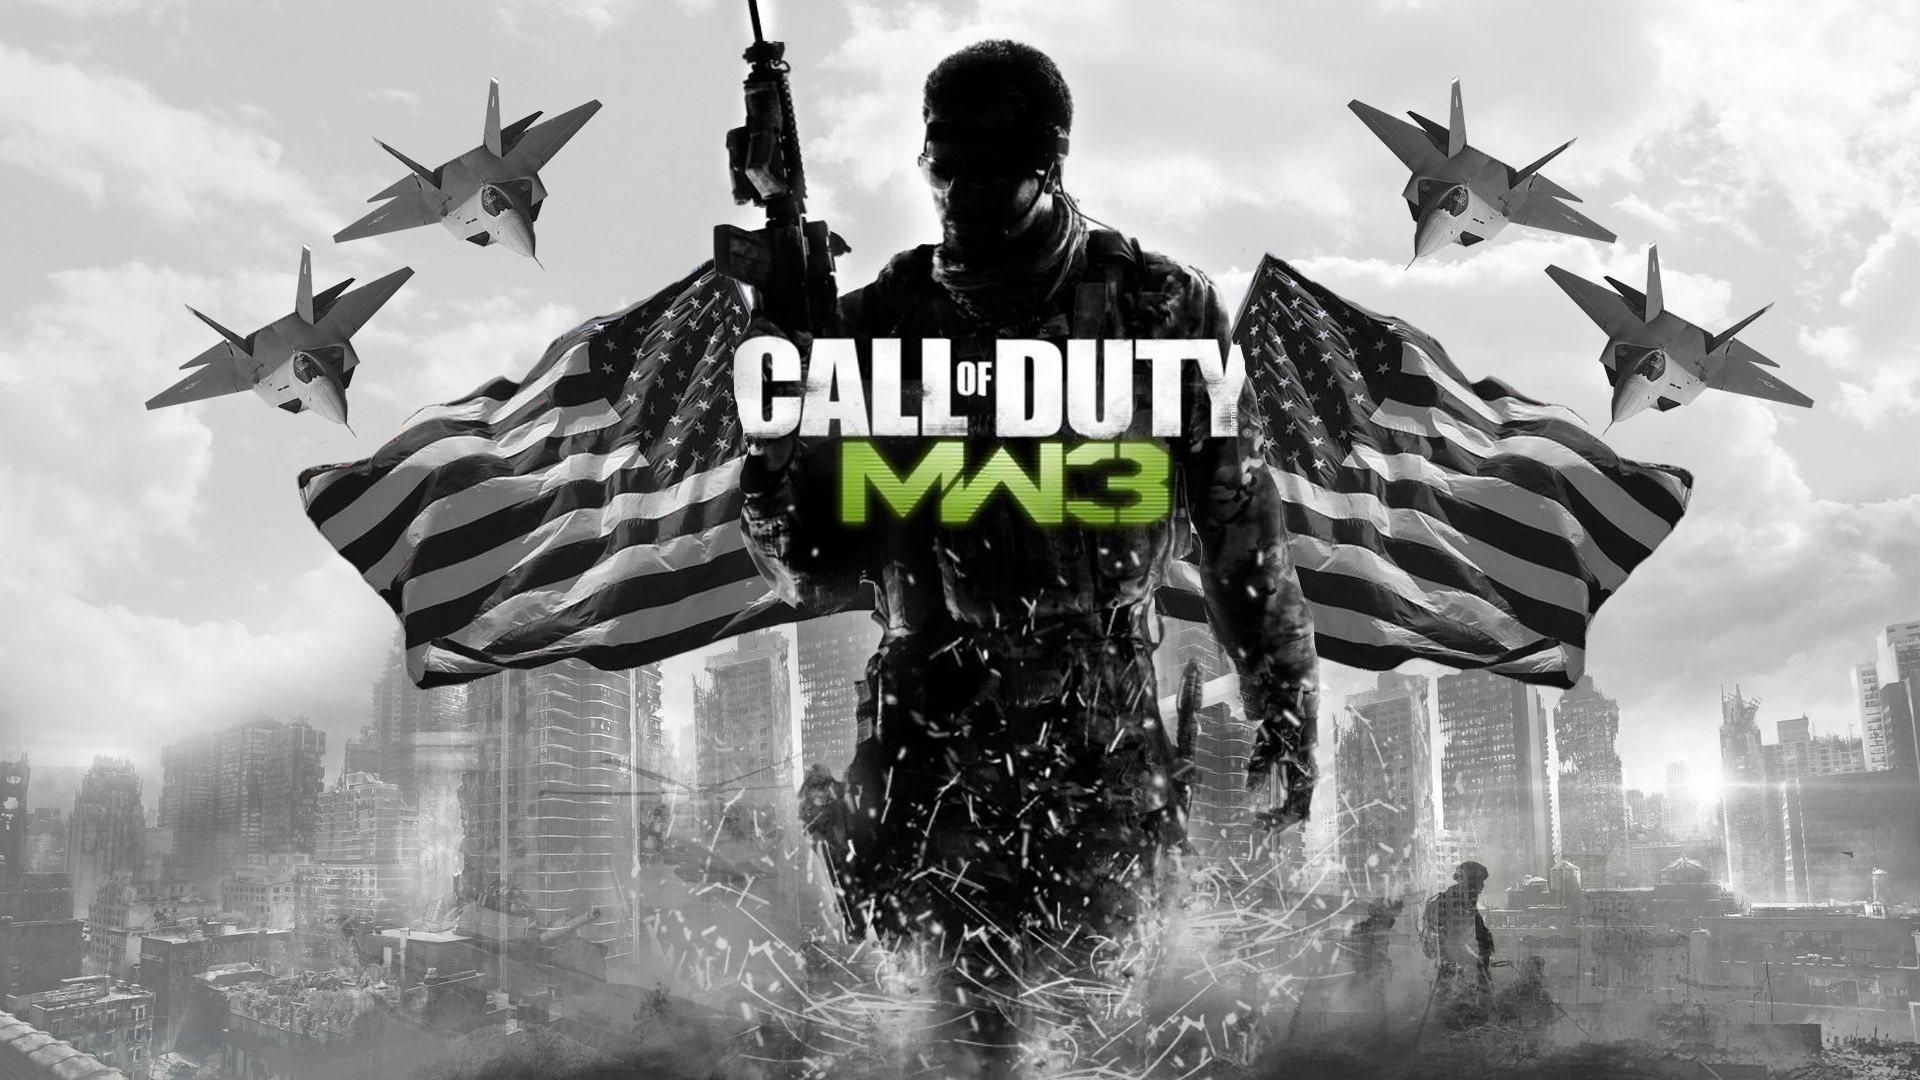 HD Quality War Game Call of Duty MW3 Wallpapers 5 Full Size ...